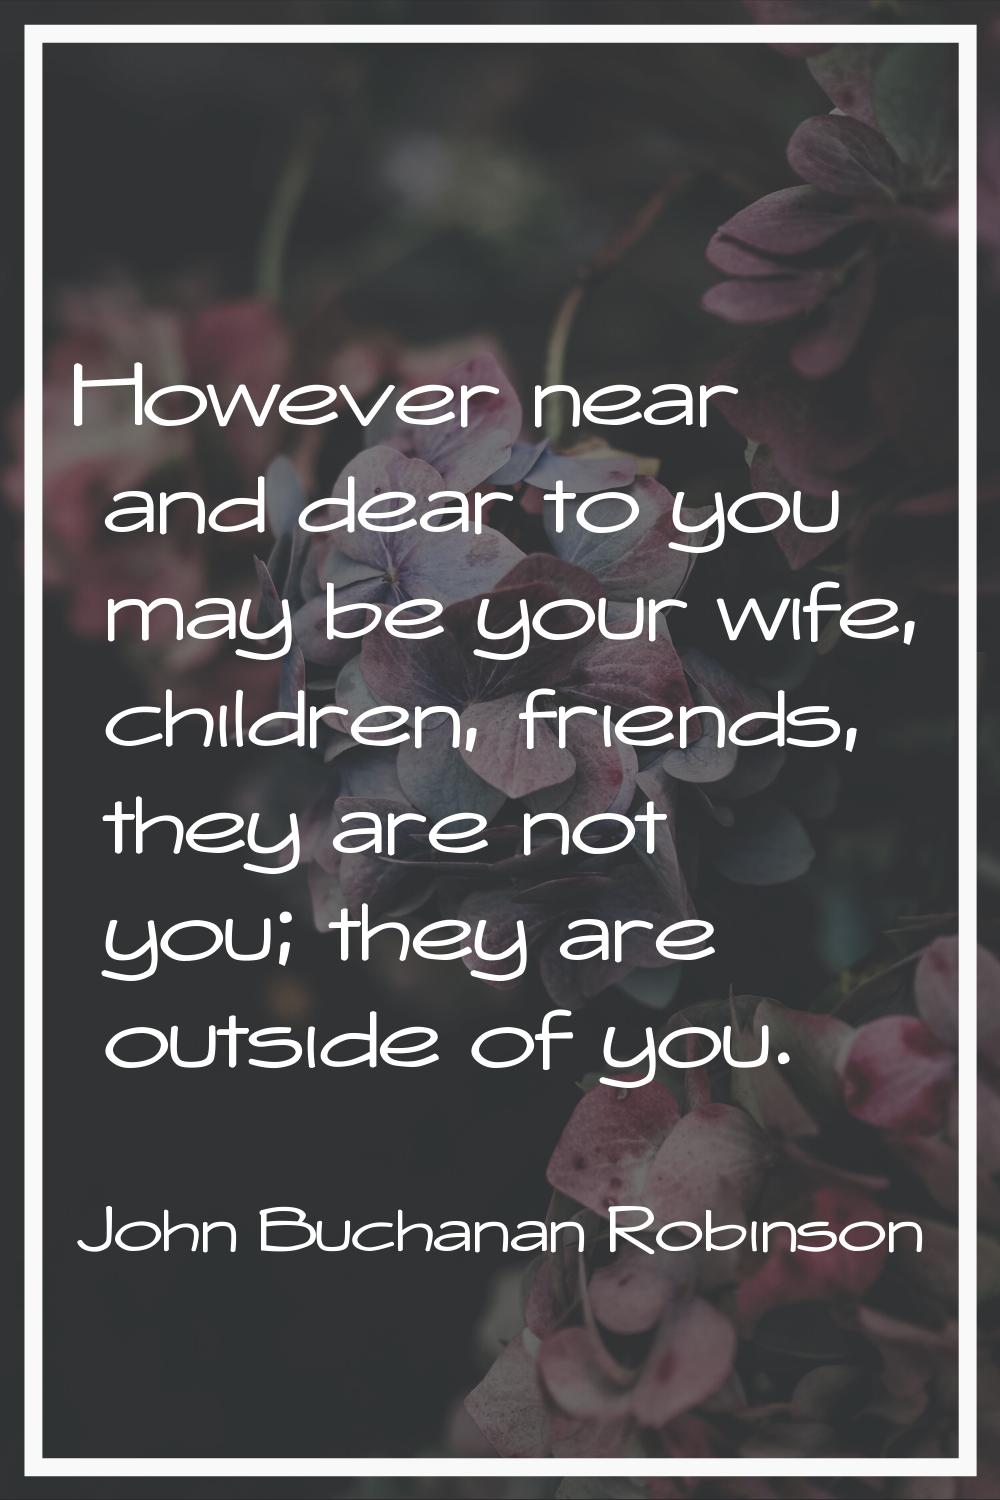 However near and dear to you may be your wife, children, friends, they are not you; they are outsid